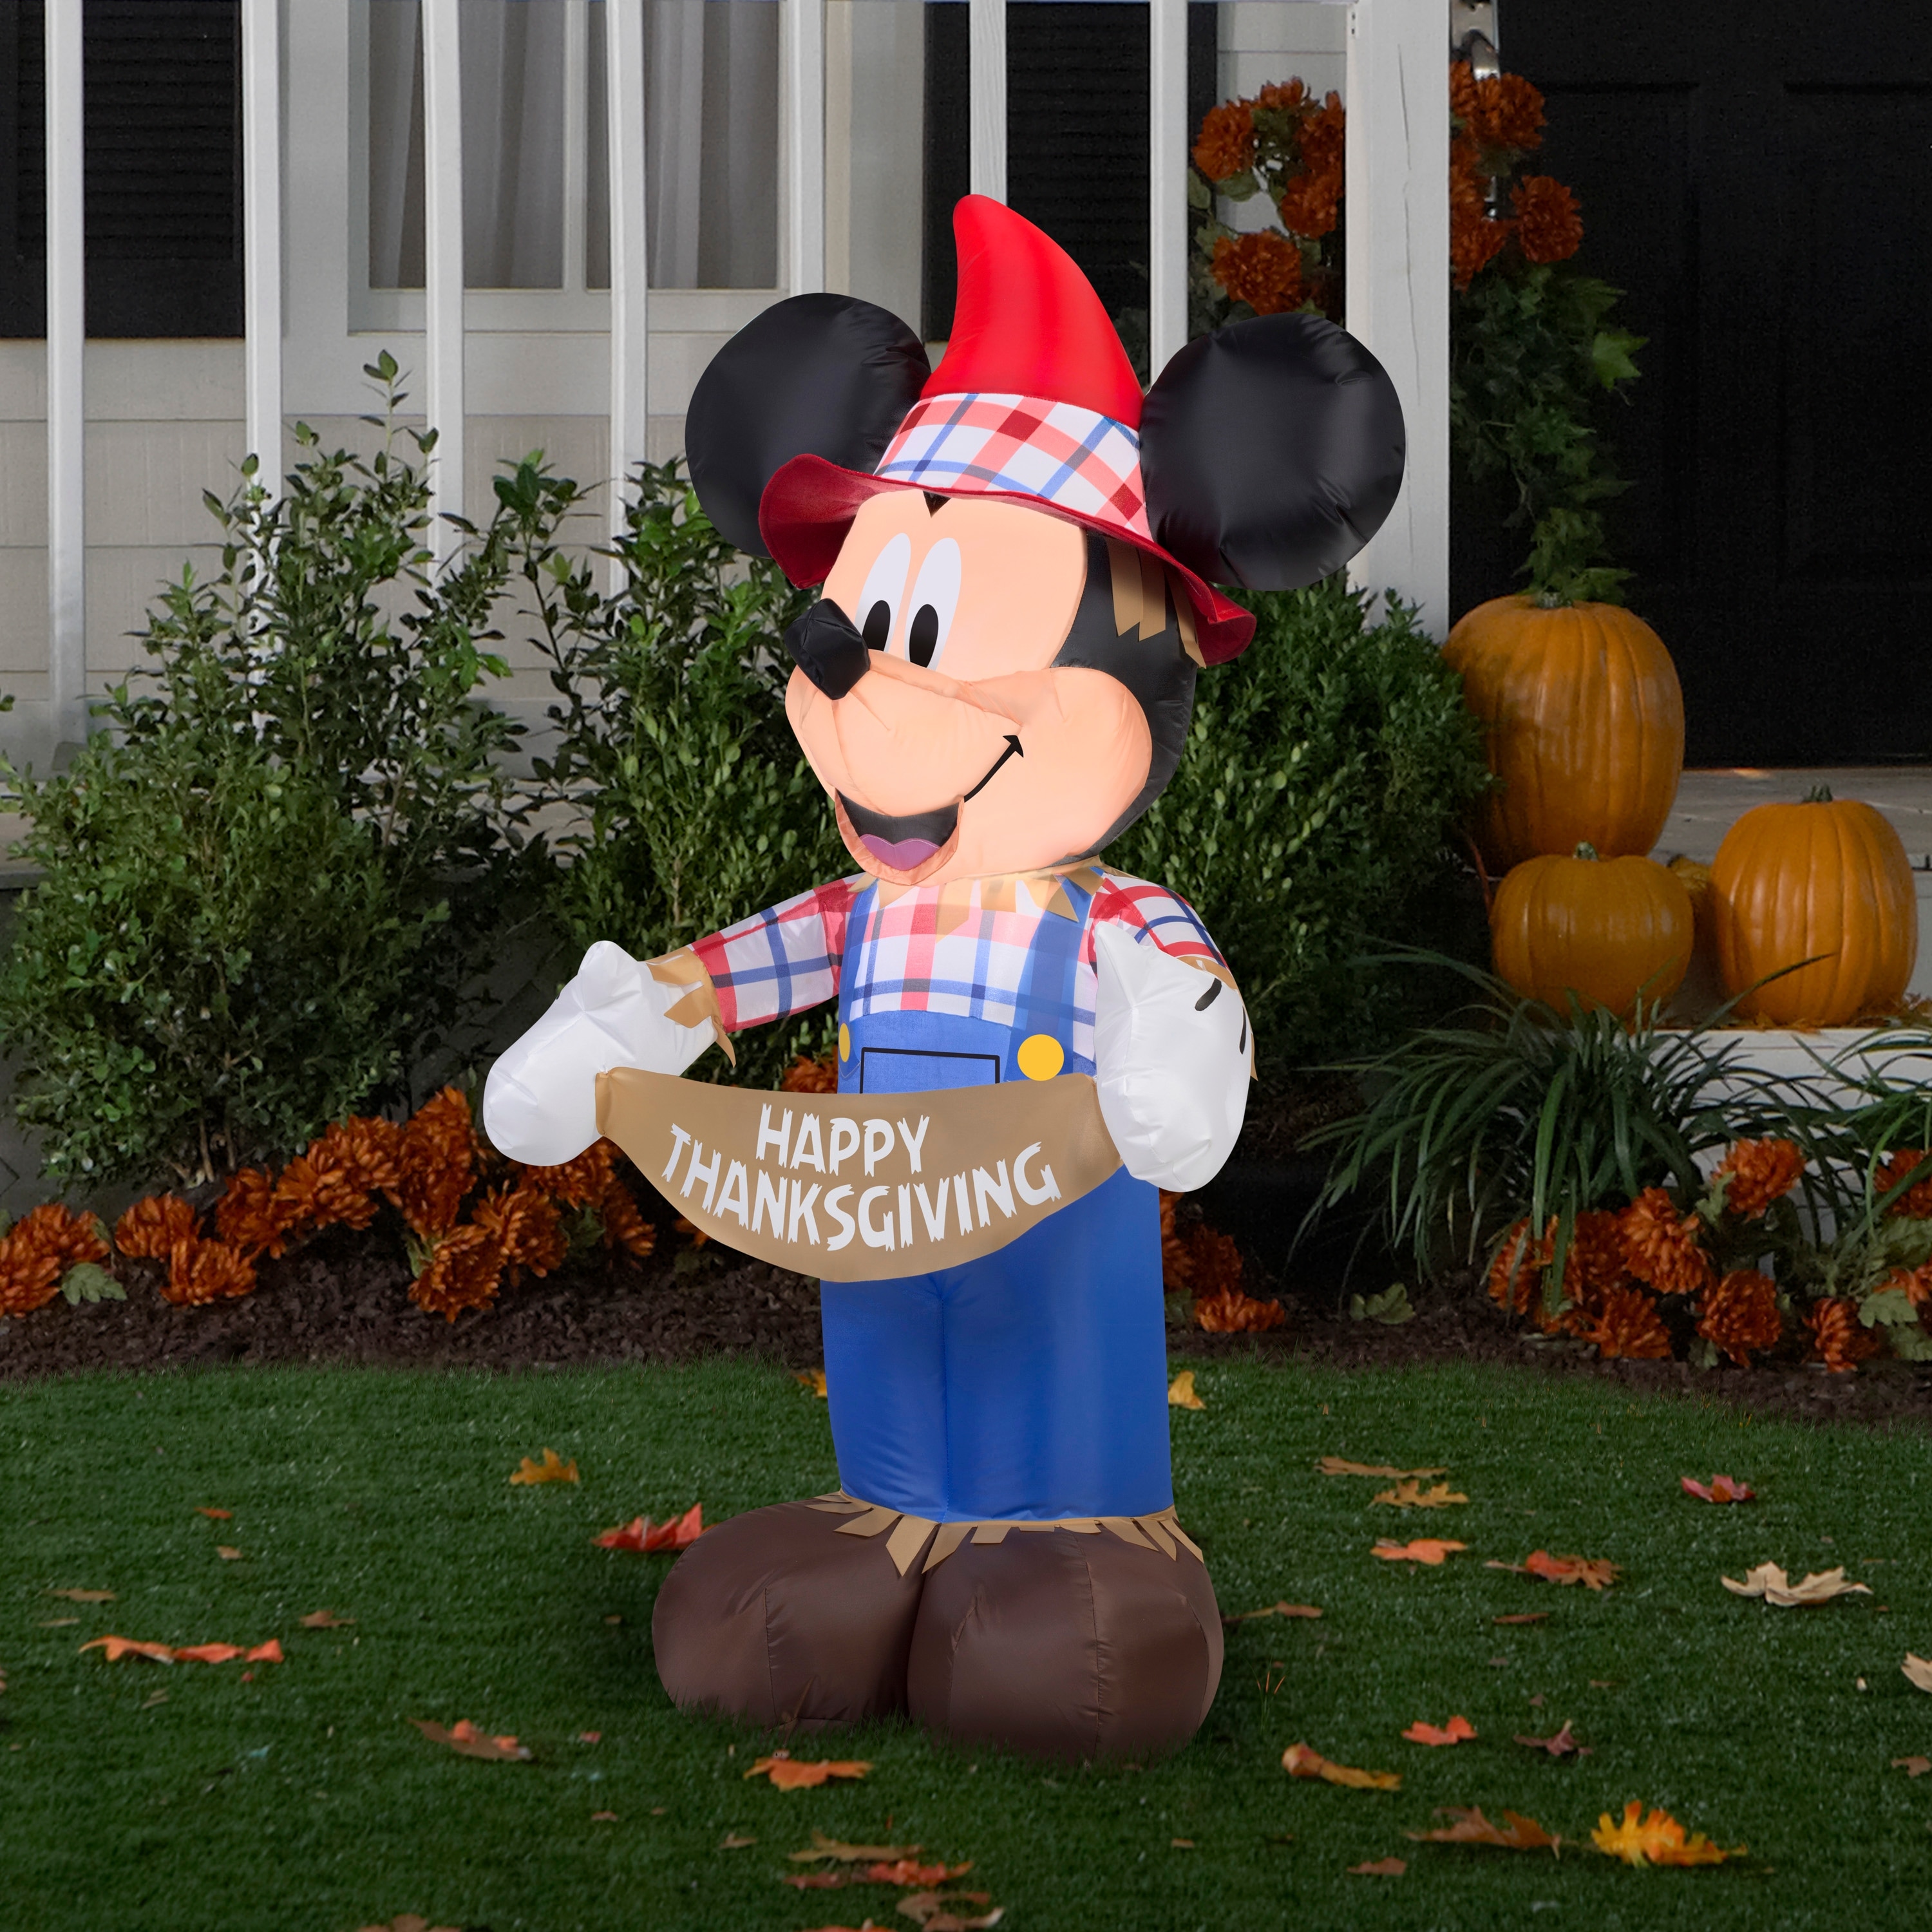 https://ak1.ostkcdn.com/images/products/is/images/direct/b011c6f815e6b6af424a0d71b0acc5ef779f0bd1/Gemmy-Airblown-Mickey-as-Scarecrow-Disney%2C-3.5-ft-Tall%2C-Multicolored.jpg